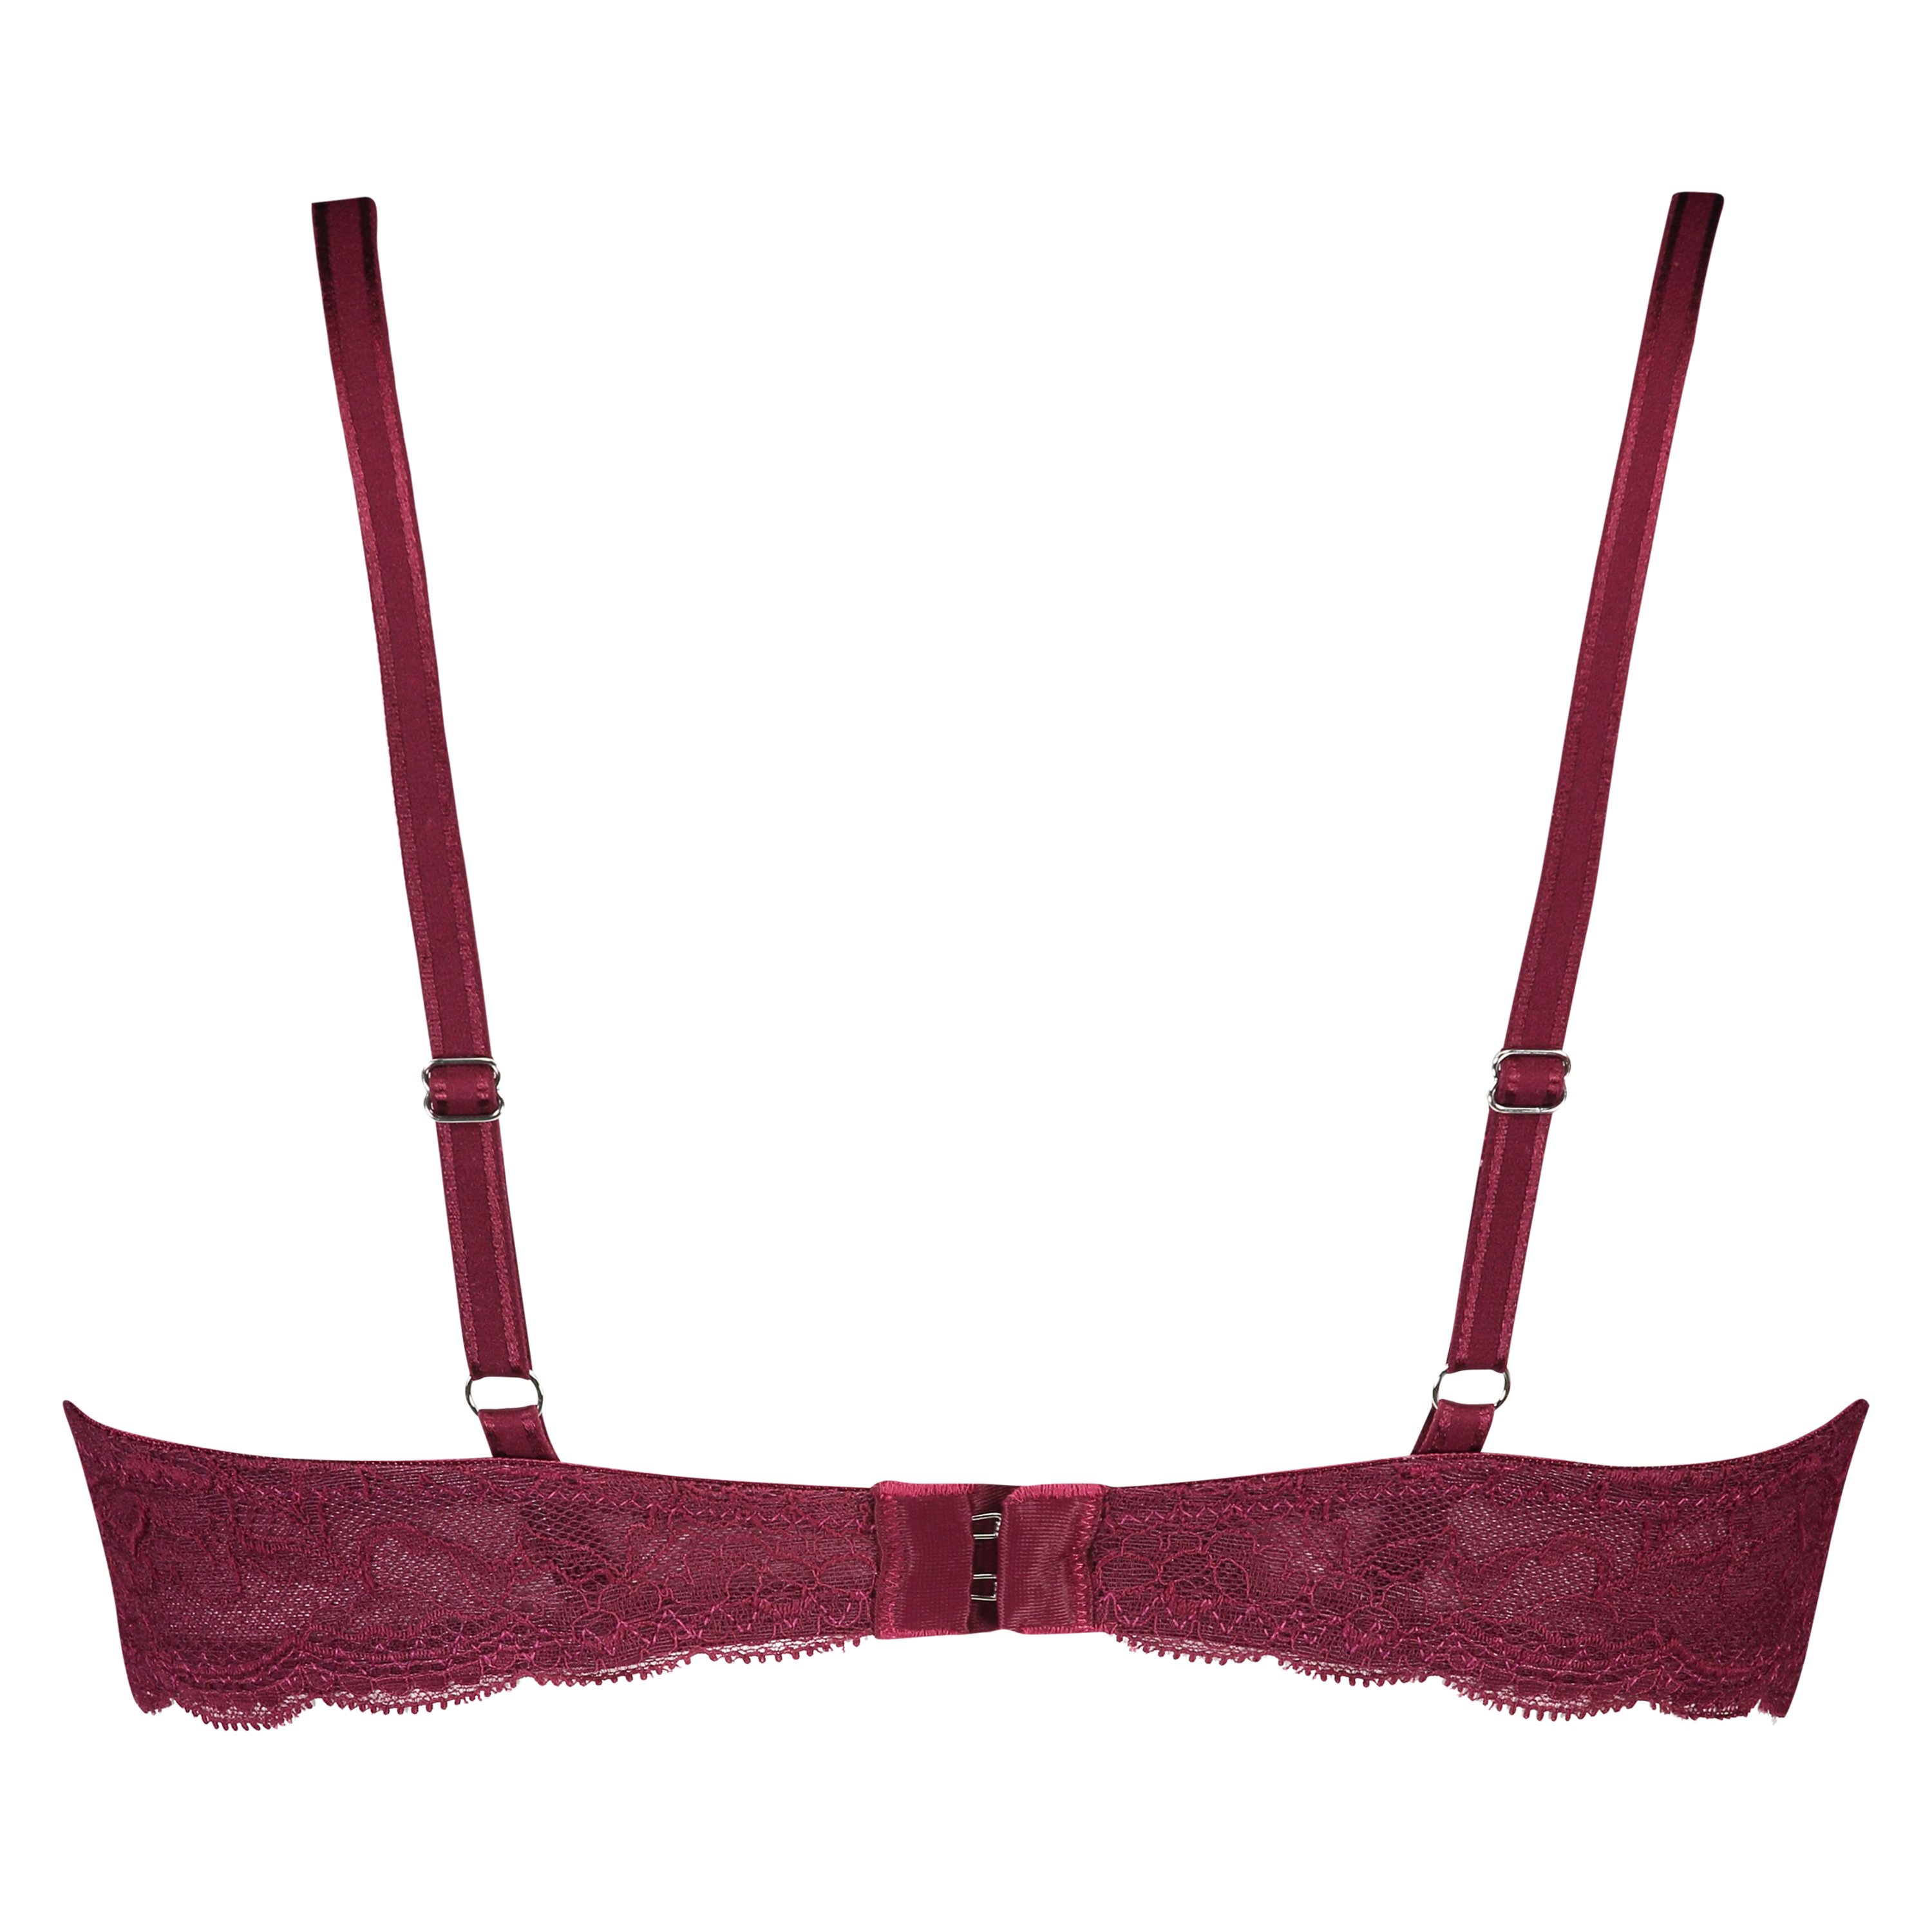 Hope Padded Non-Underwired Bra, Red, main